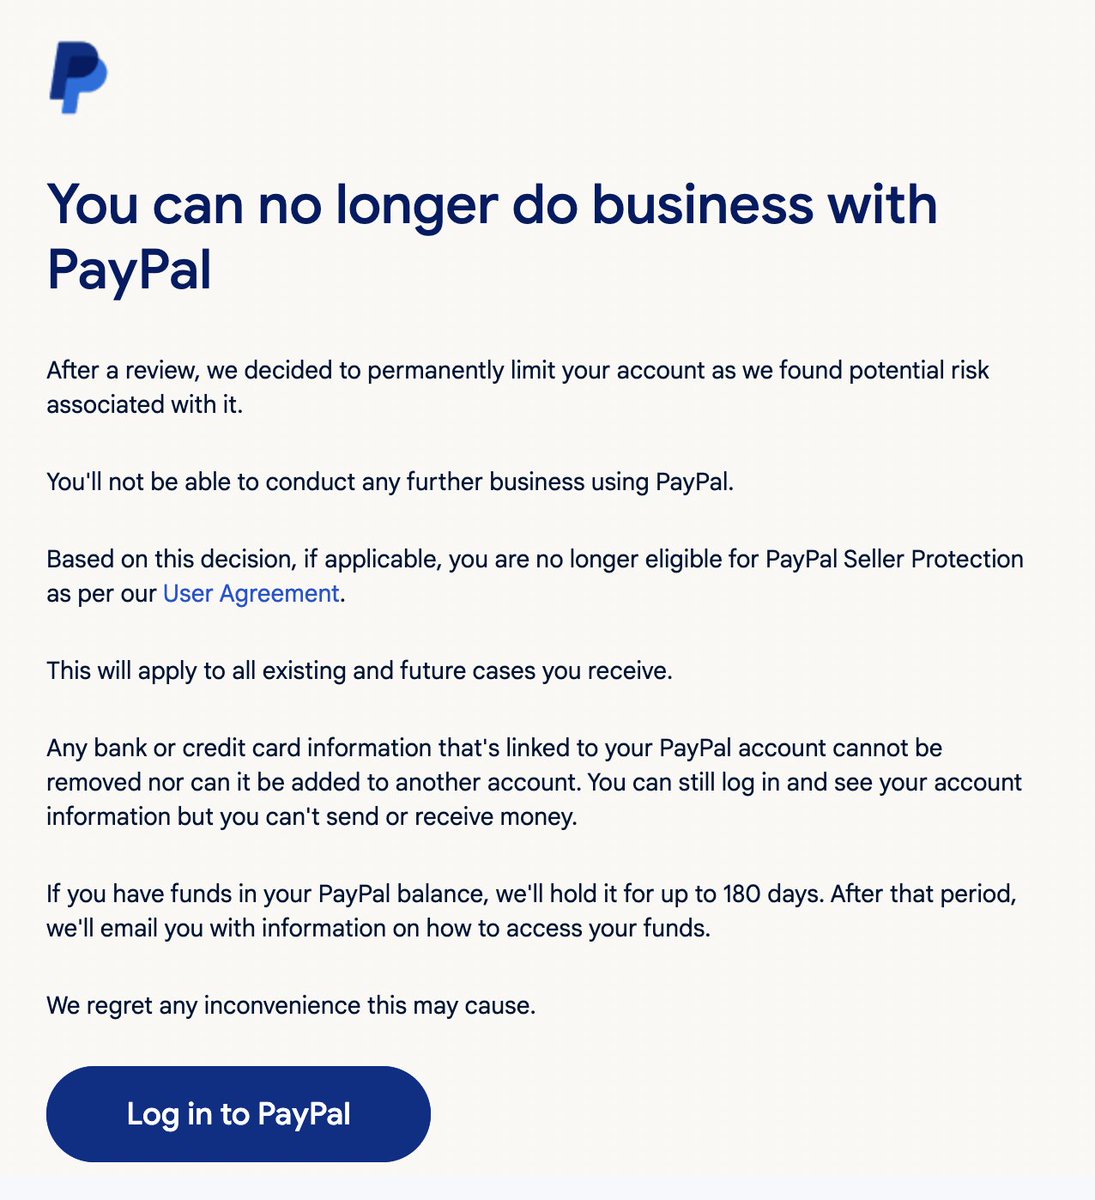 Paypal @AskPayPal blocks the account of DOXA @doxa_journal without explaining the reason. We are Russian anti-war media, and we need the account to collect donations. Please RT so that Paypal unblocks our account ASAP...